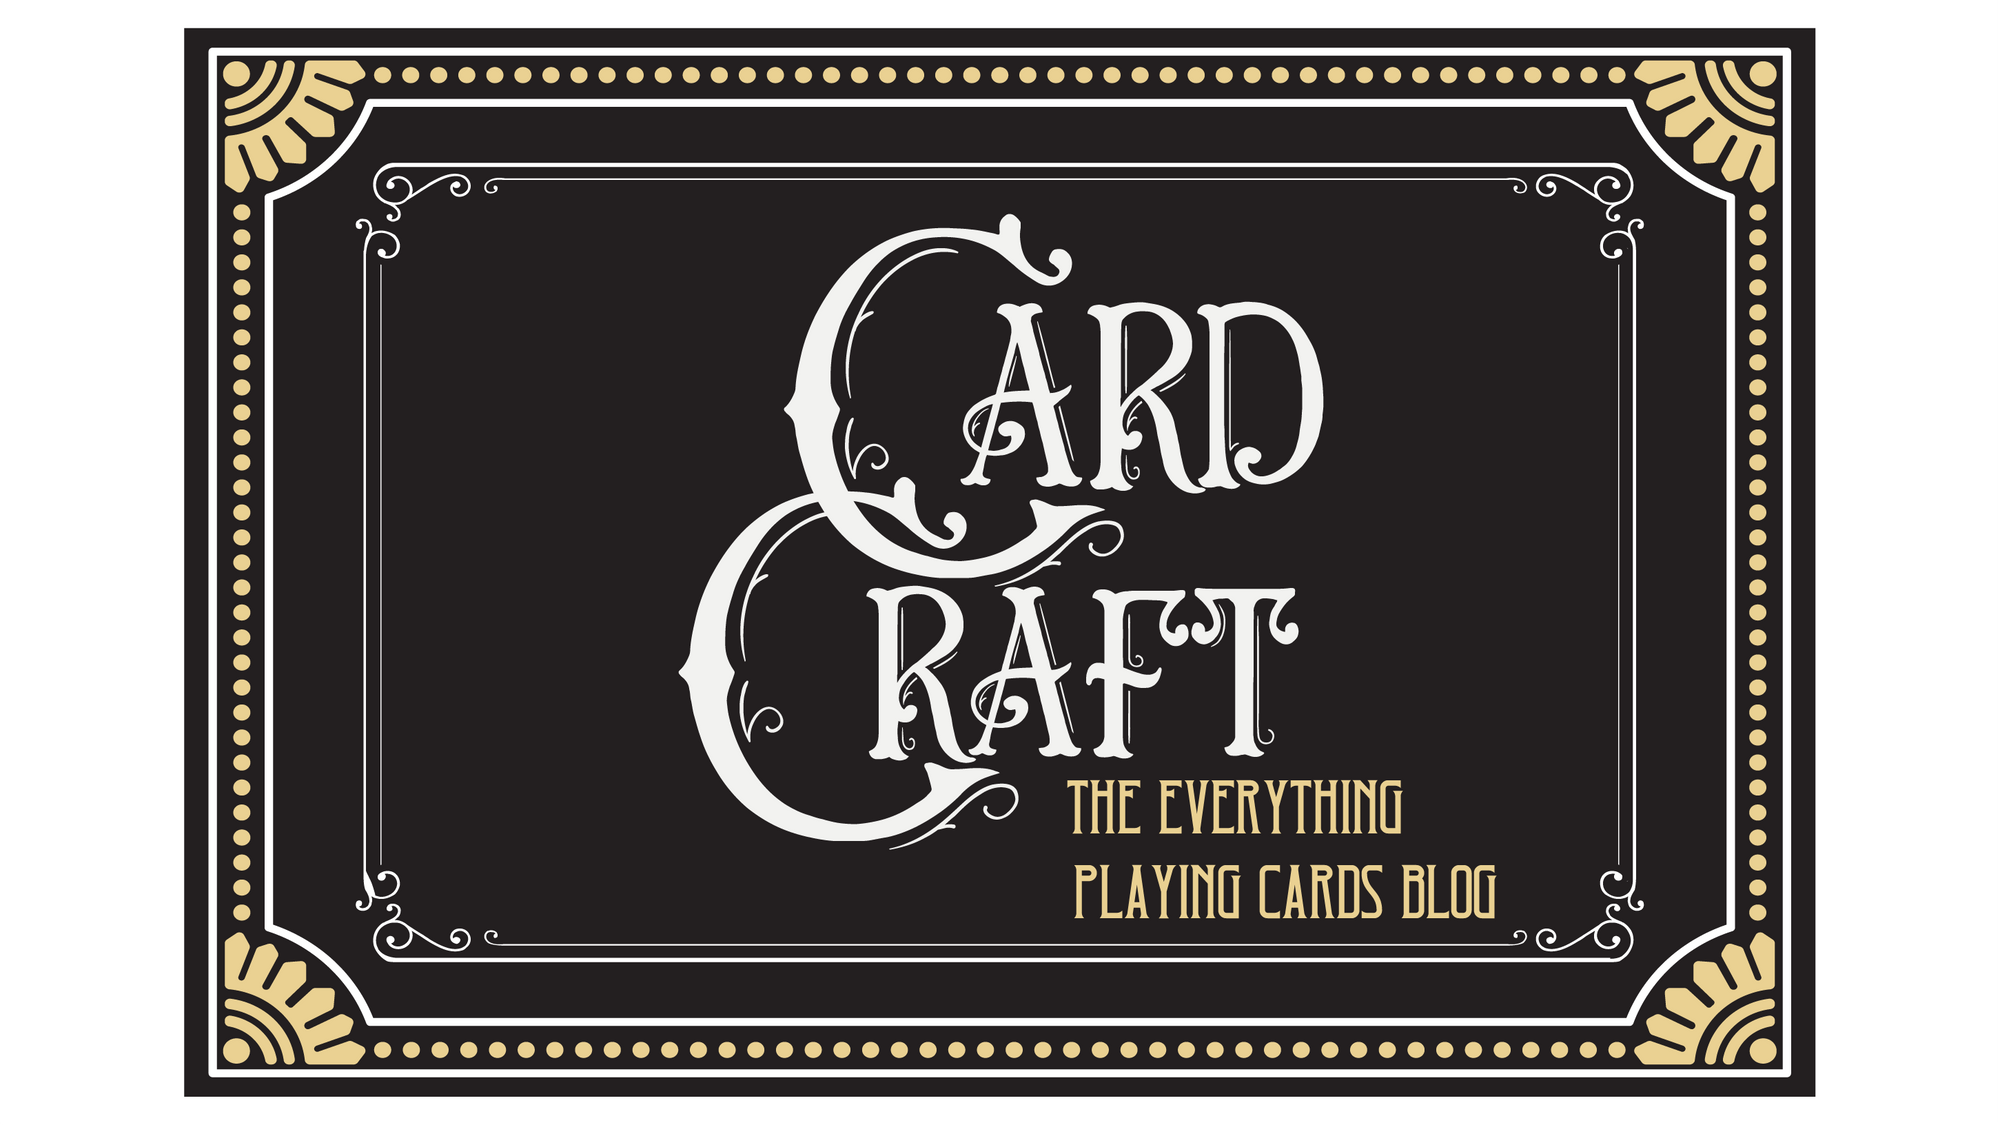 Card Craft - The Everything Playing Cards Blog